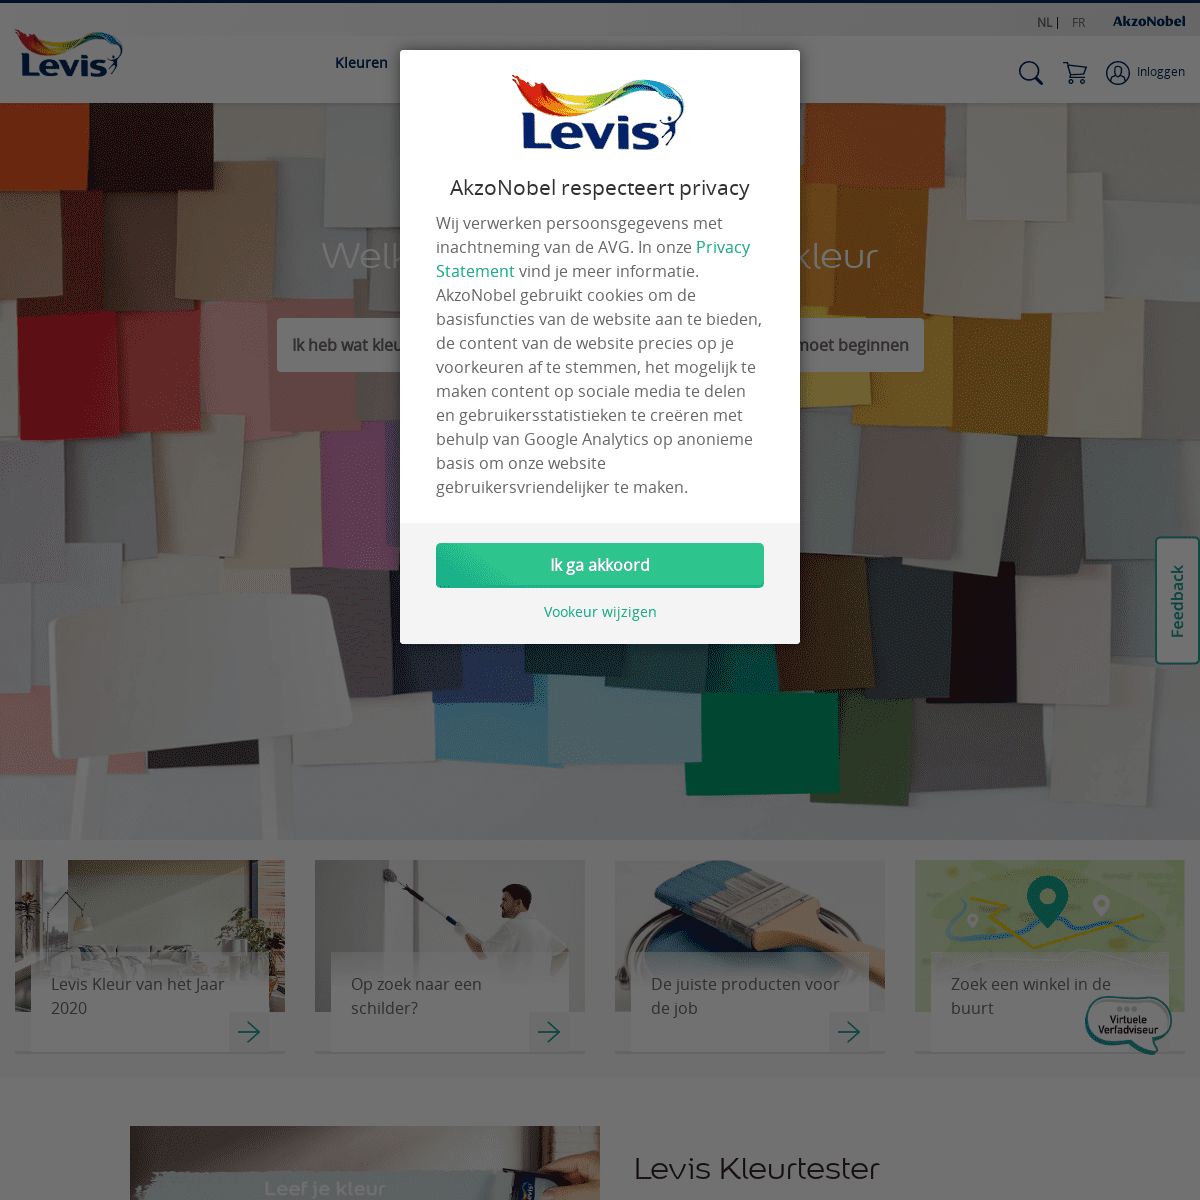 A complete backup of levis.info